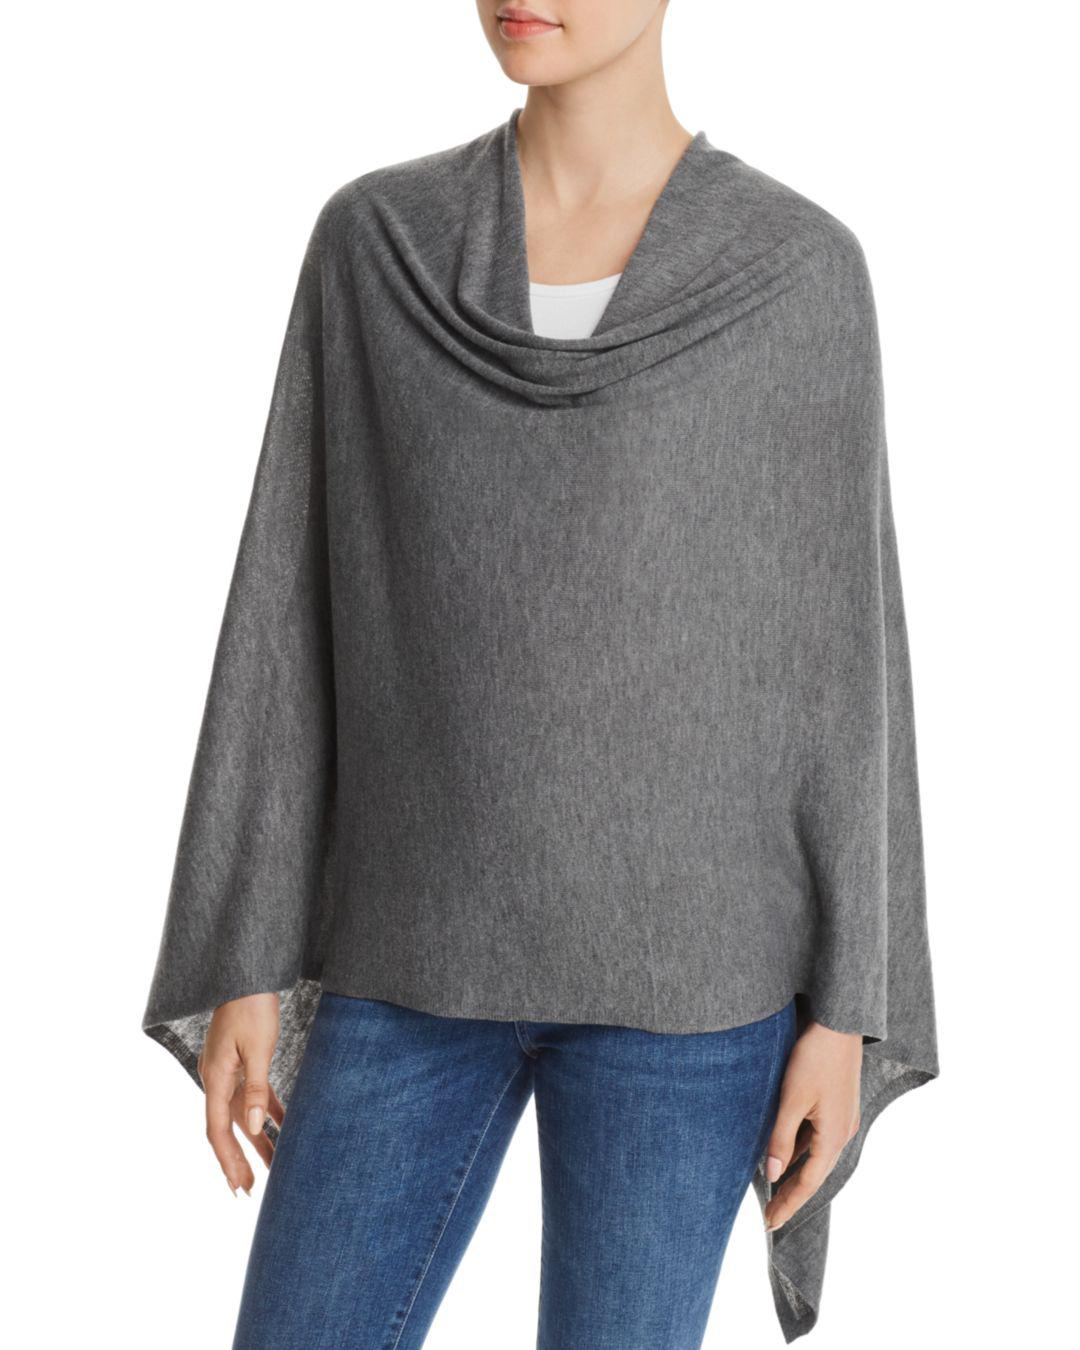 Echo Luxe Asymmetric Poncho in Charcoal (Gray) - Lyst